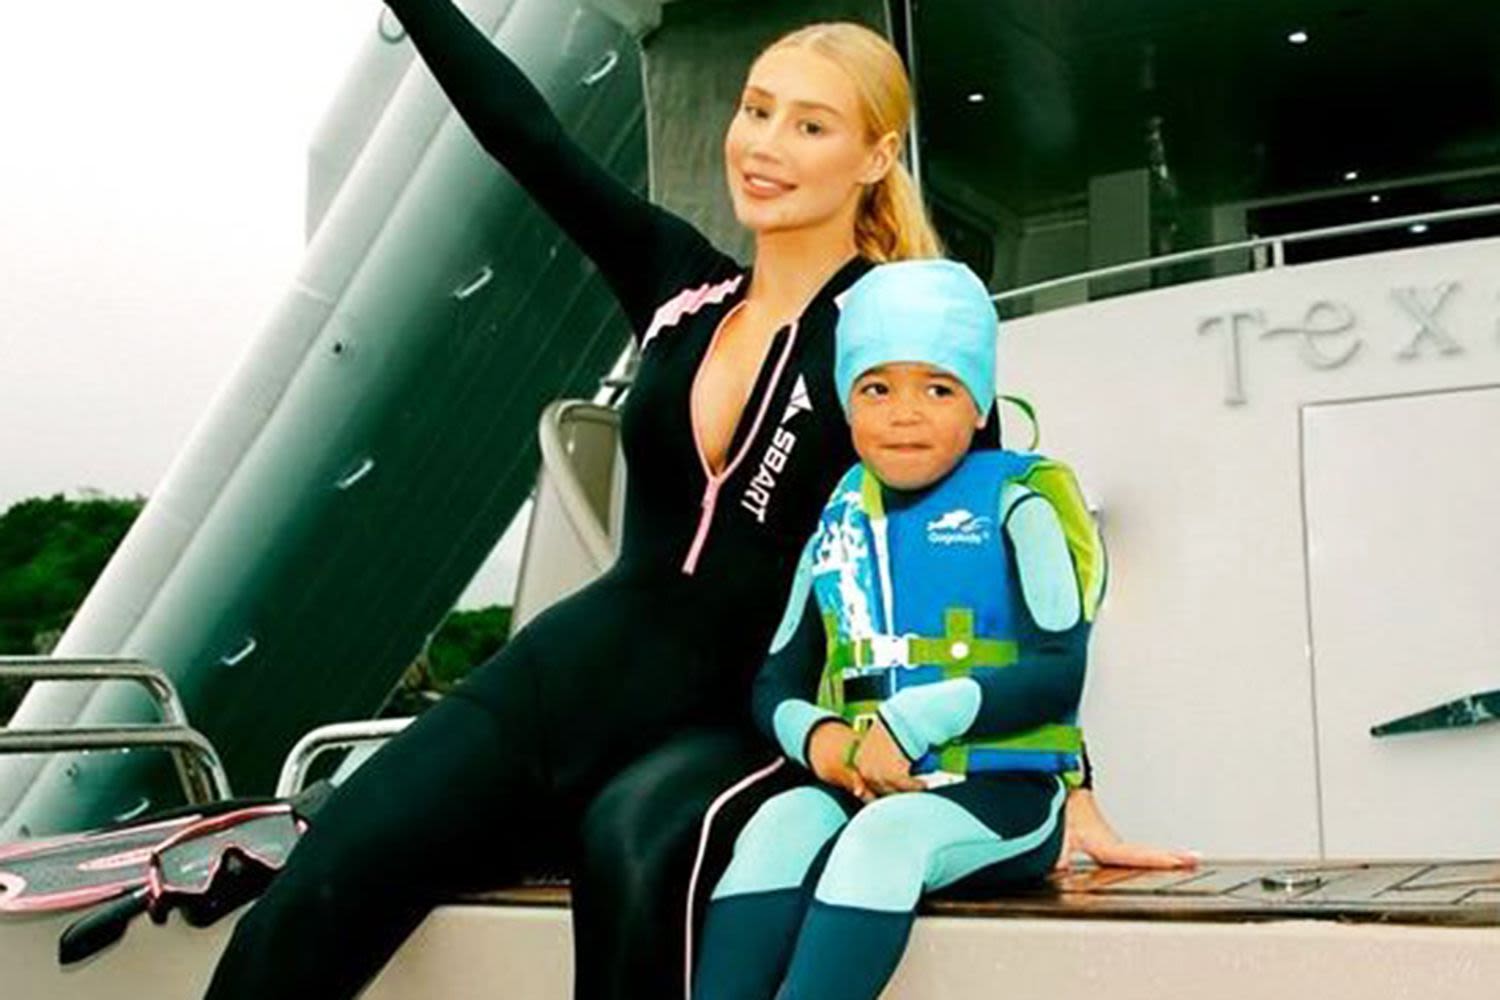 Iggy Azalea Says She's 'Very Much the Only Parent' to 4-Year-Old Son Onyx: 'I Am Not Co-Parenting'